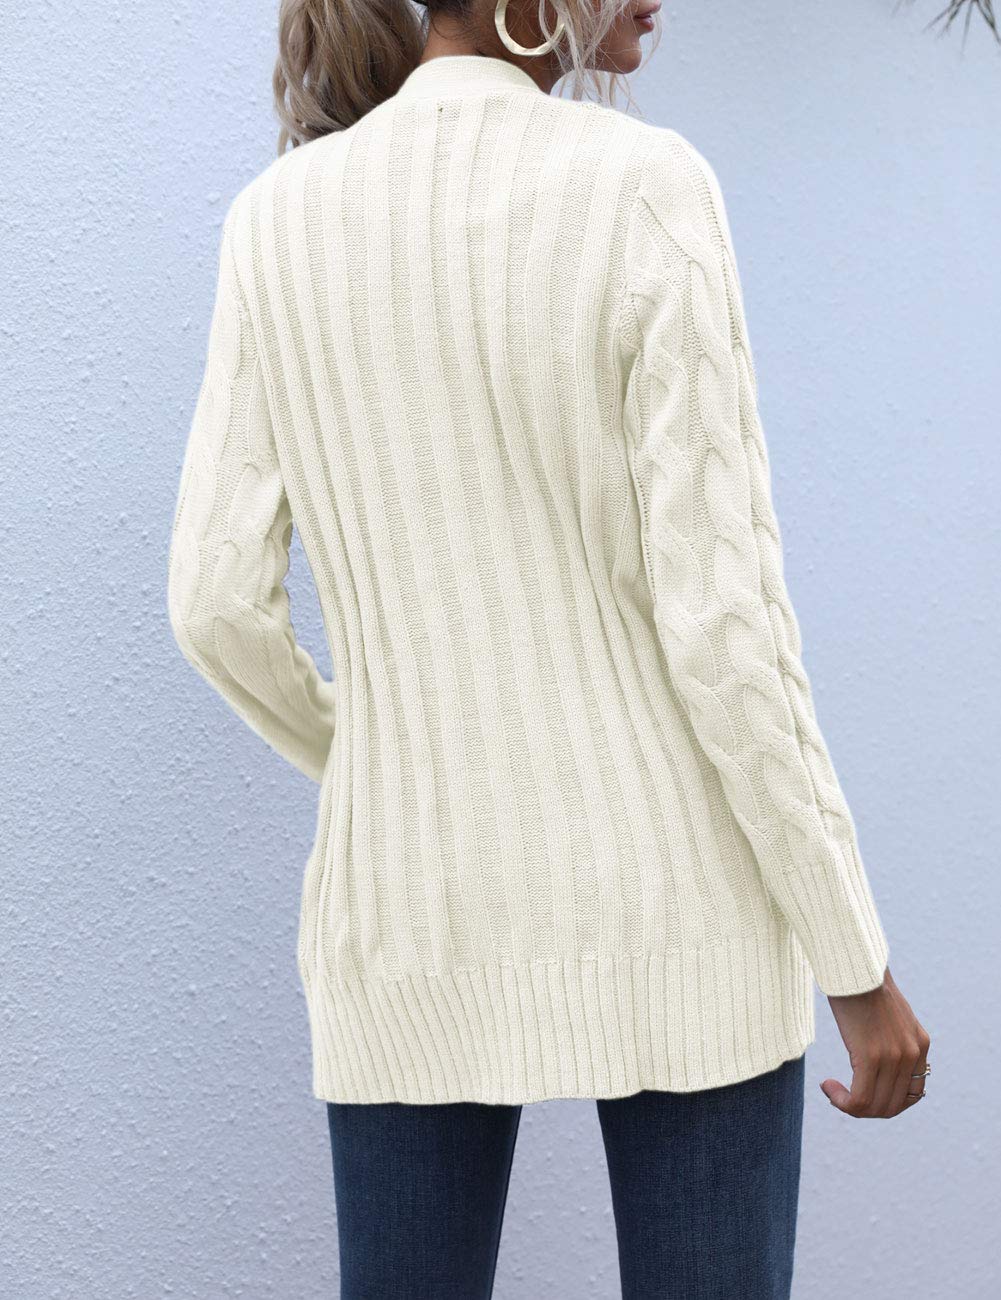 MEROKEETY Women's Long Sleeve Cable Knit Sweater Open Front Cardigan Button Loose Outerwear